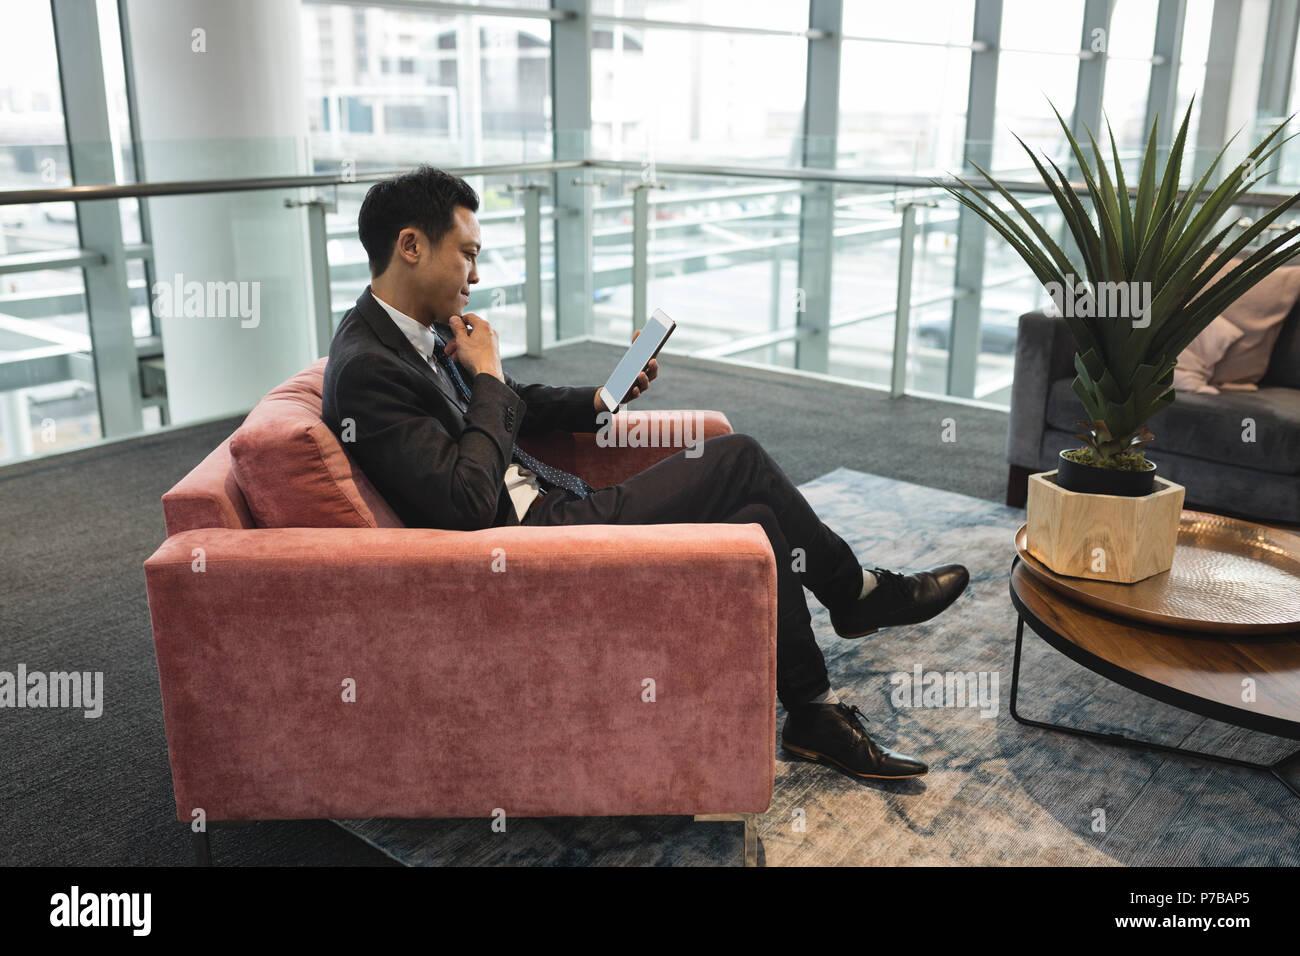 Businessman sitting on chair and using tablet Stock Photo